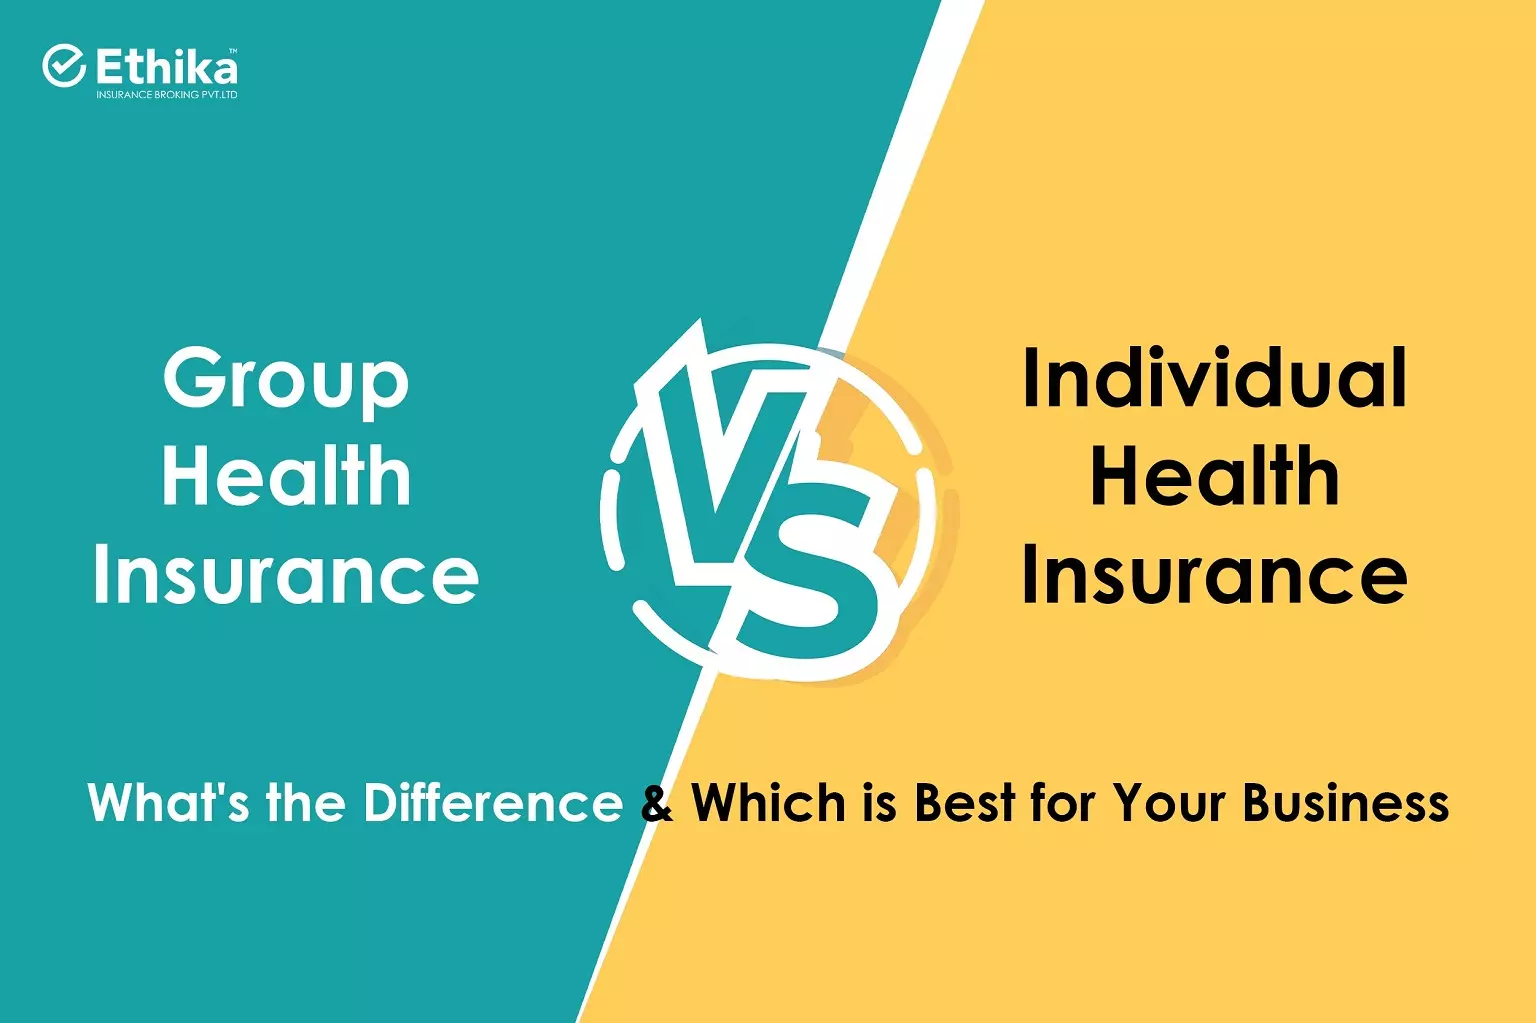 Group Health Insurance vs. Individual Health Insurance: What's the Difference and Which is Best for Your Business?